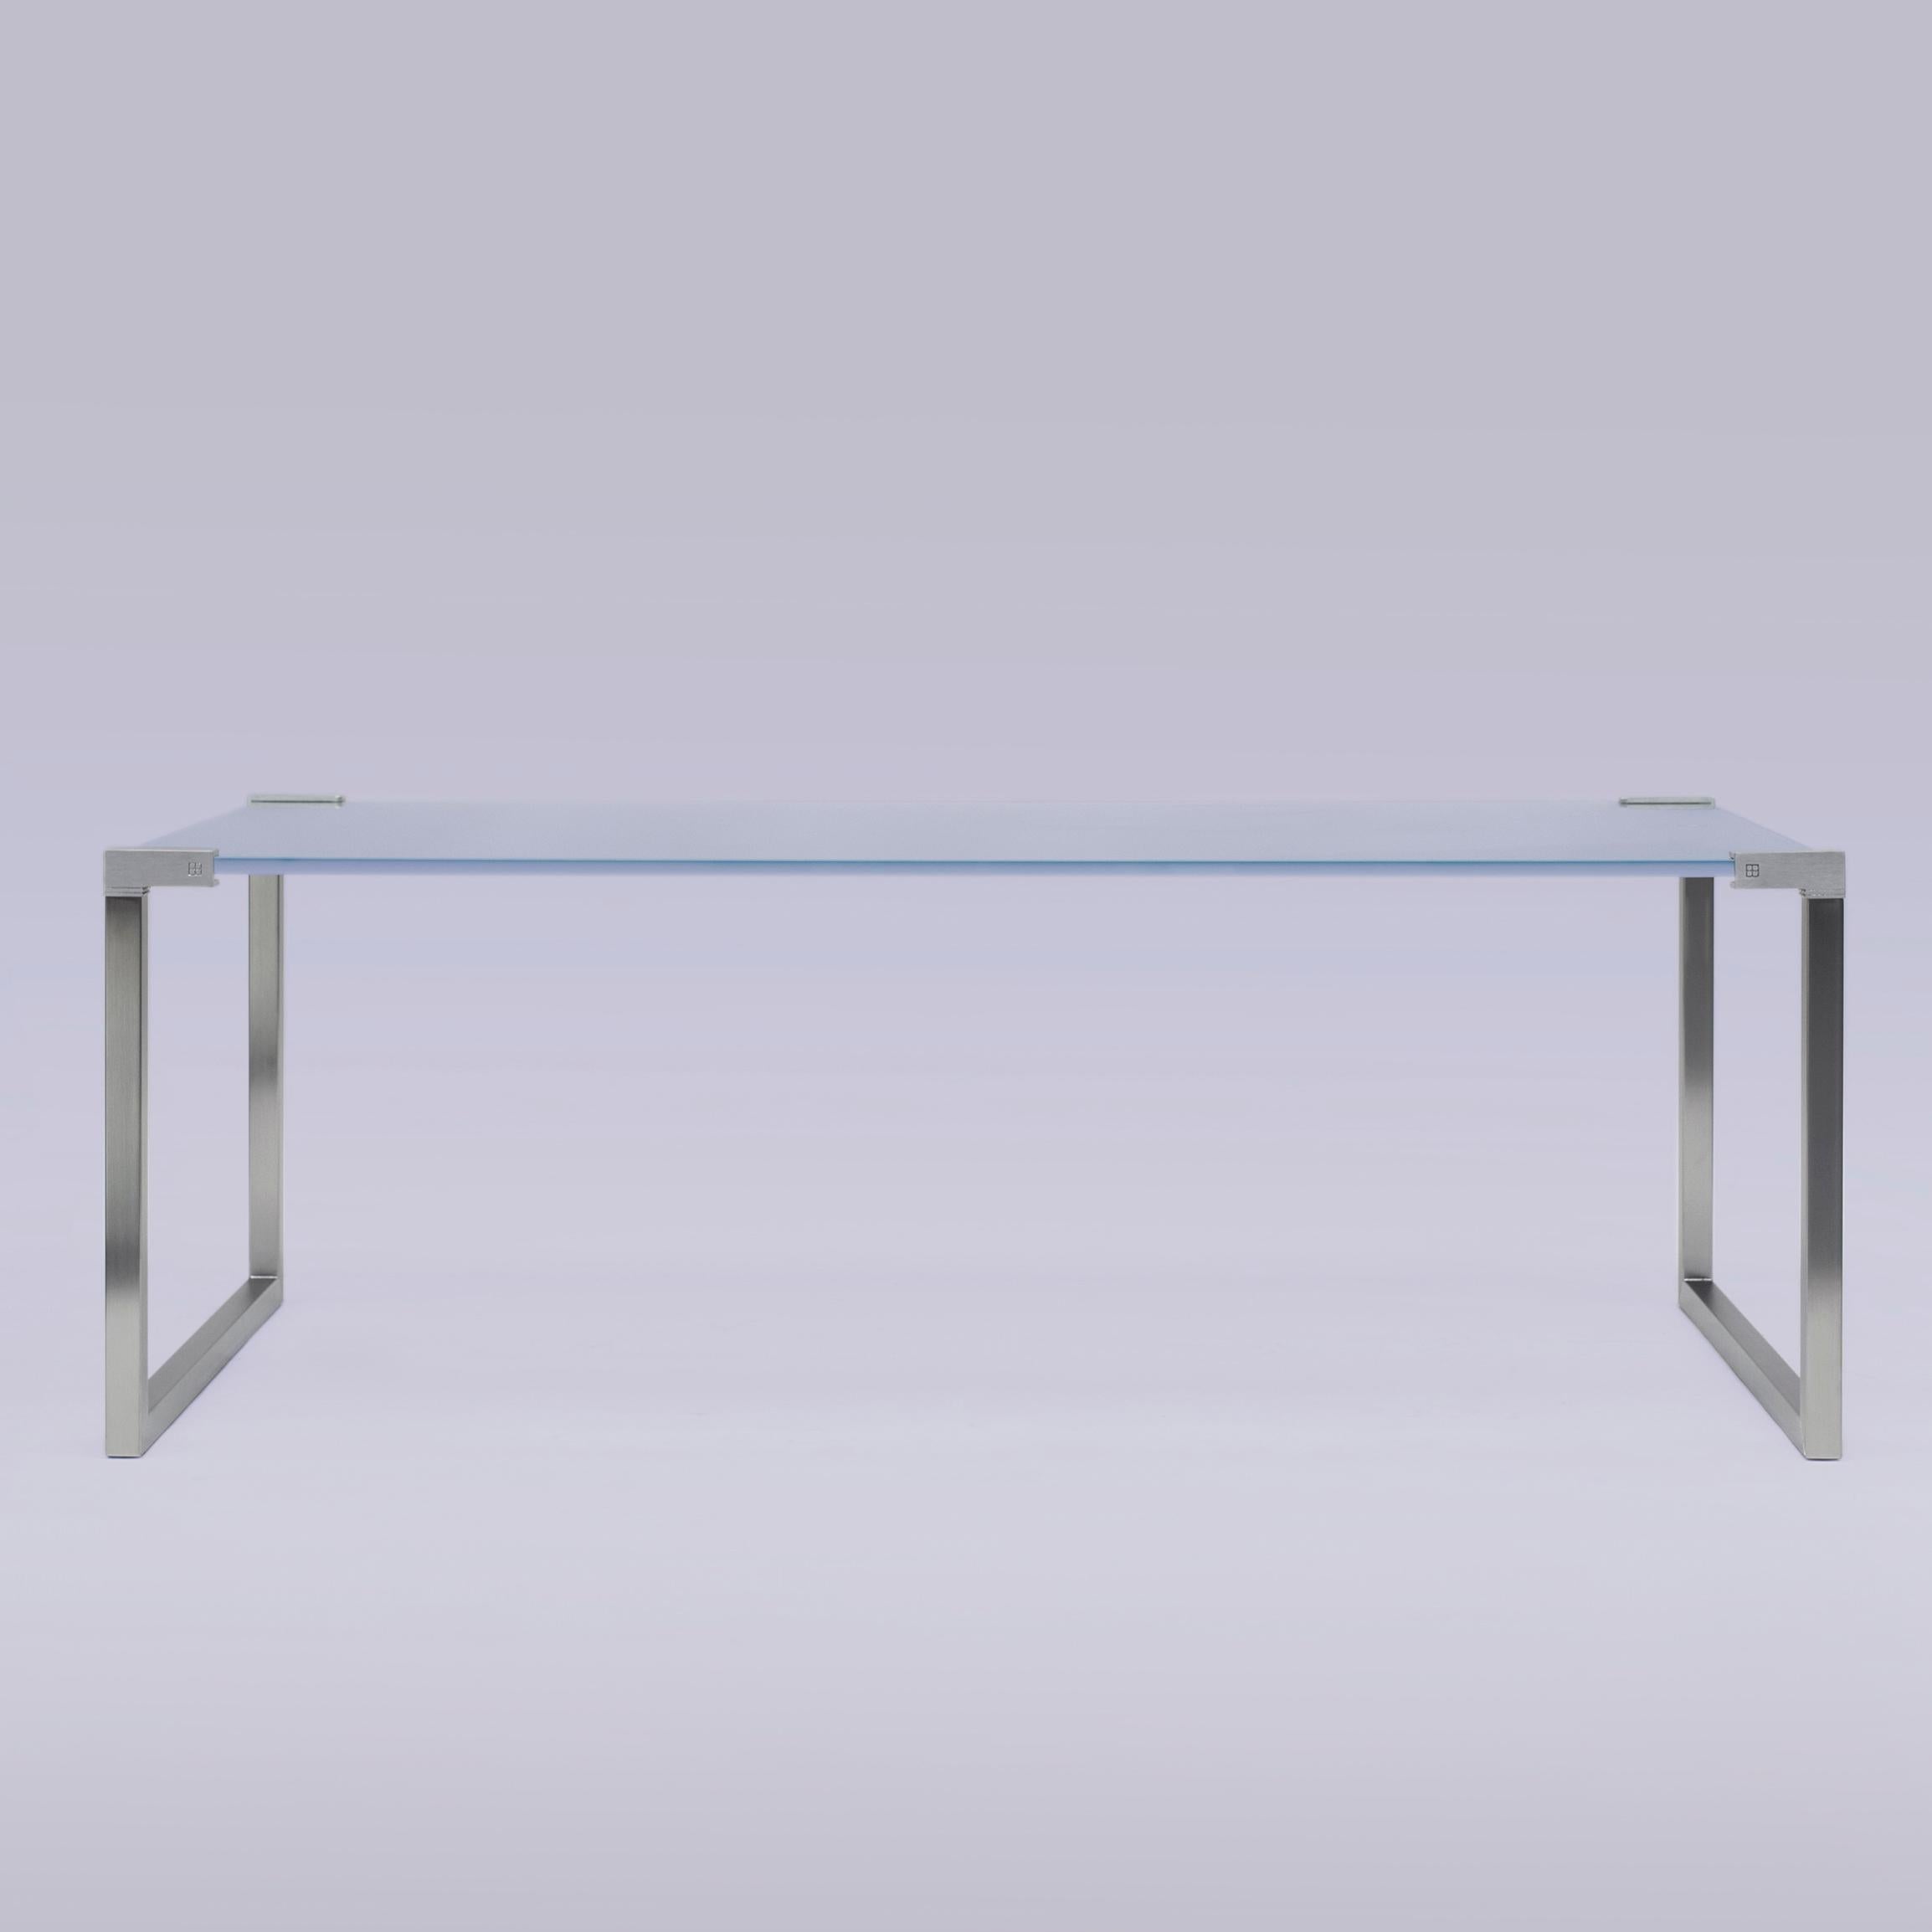 Contemporary Peter Ghyczy Coffee Table Pioneer 'T53' Stainless Steel Matt / Satin Glass